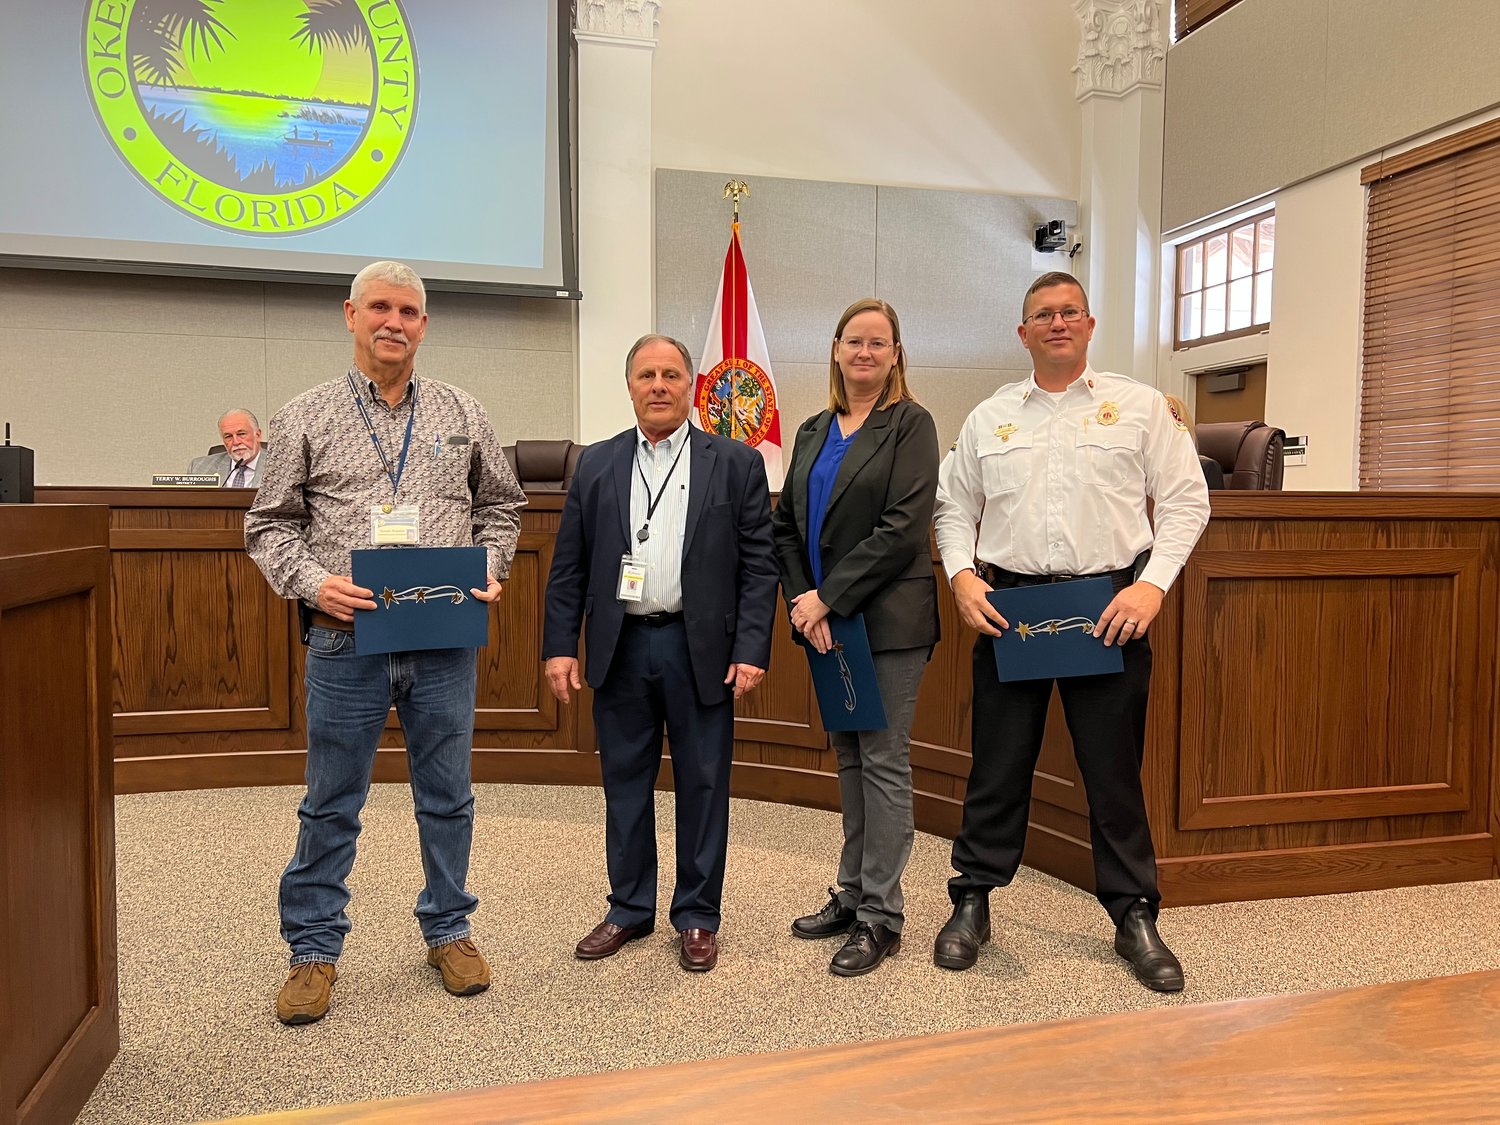 Left to right are:  Assistant to County Administrator/Special Projects, ￼￼Russell Rowland, City Administrator Gary Ritter, Community Services Director Denise Whitehead, and Bureau Chief of Community Risk Reduction/Fire Marshal, Justin Hazellief.